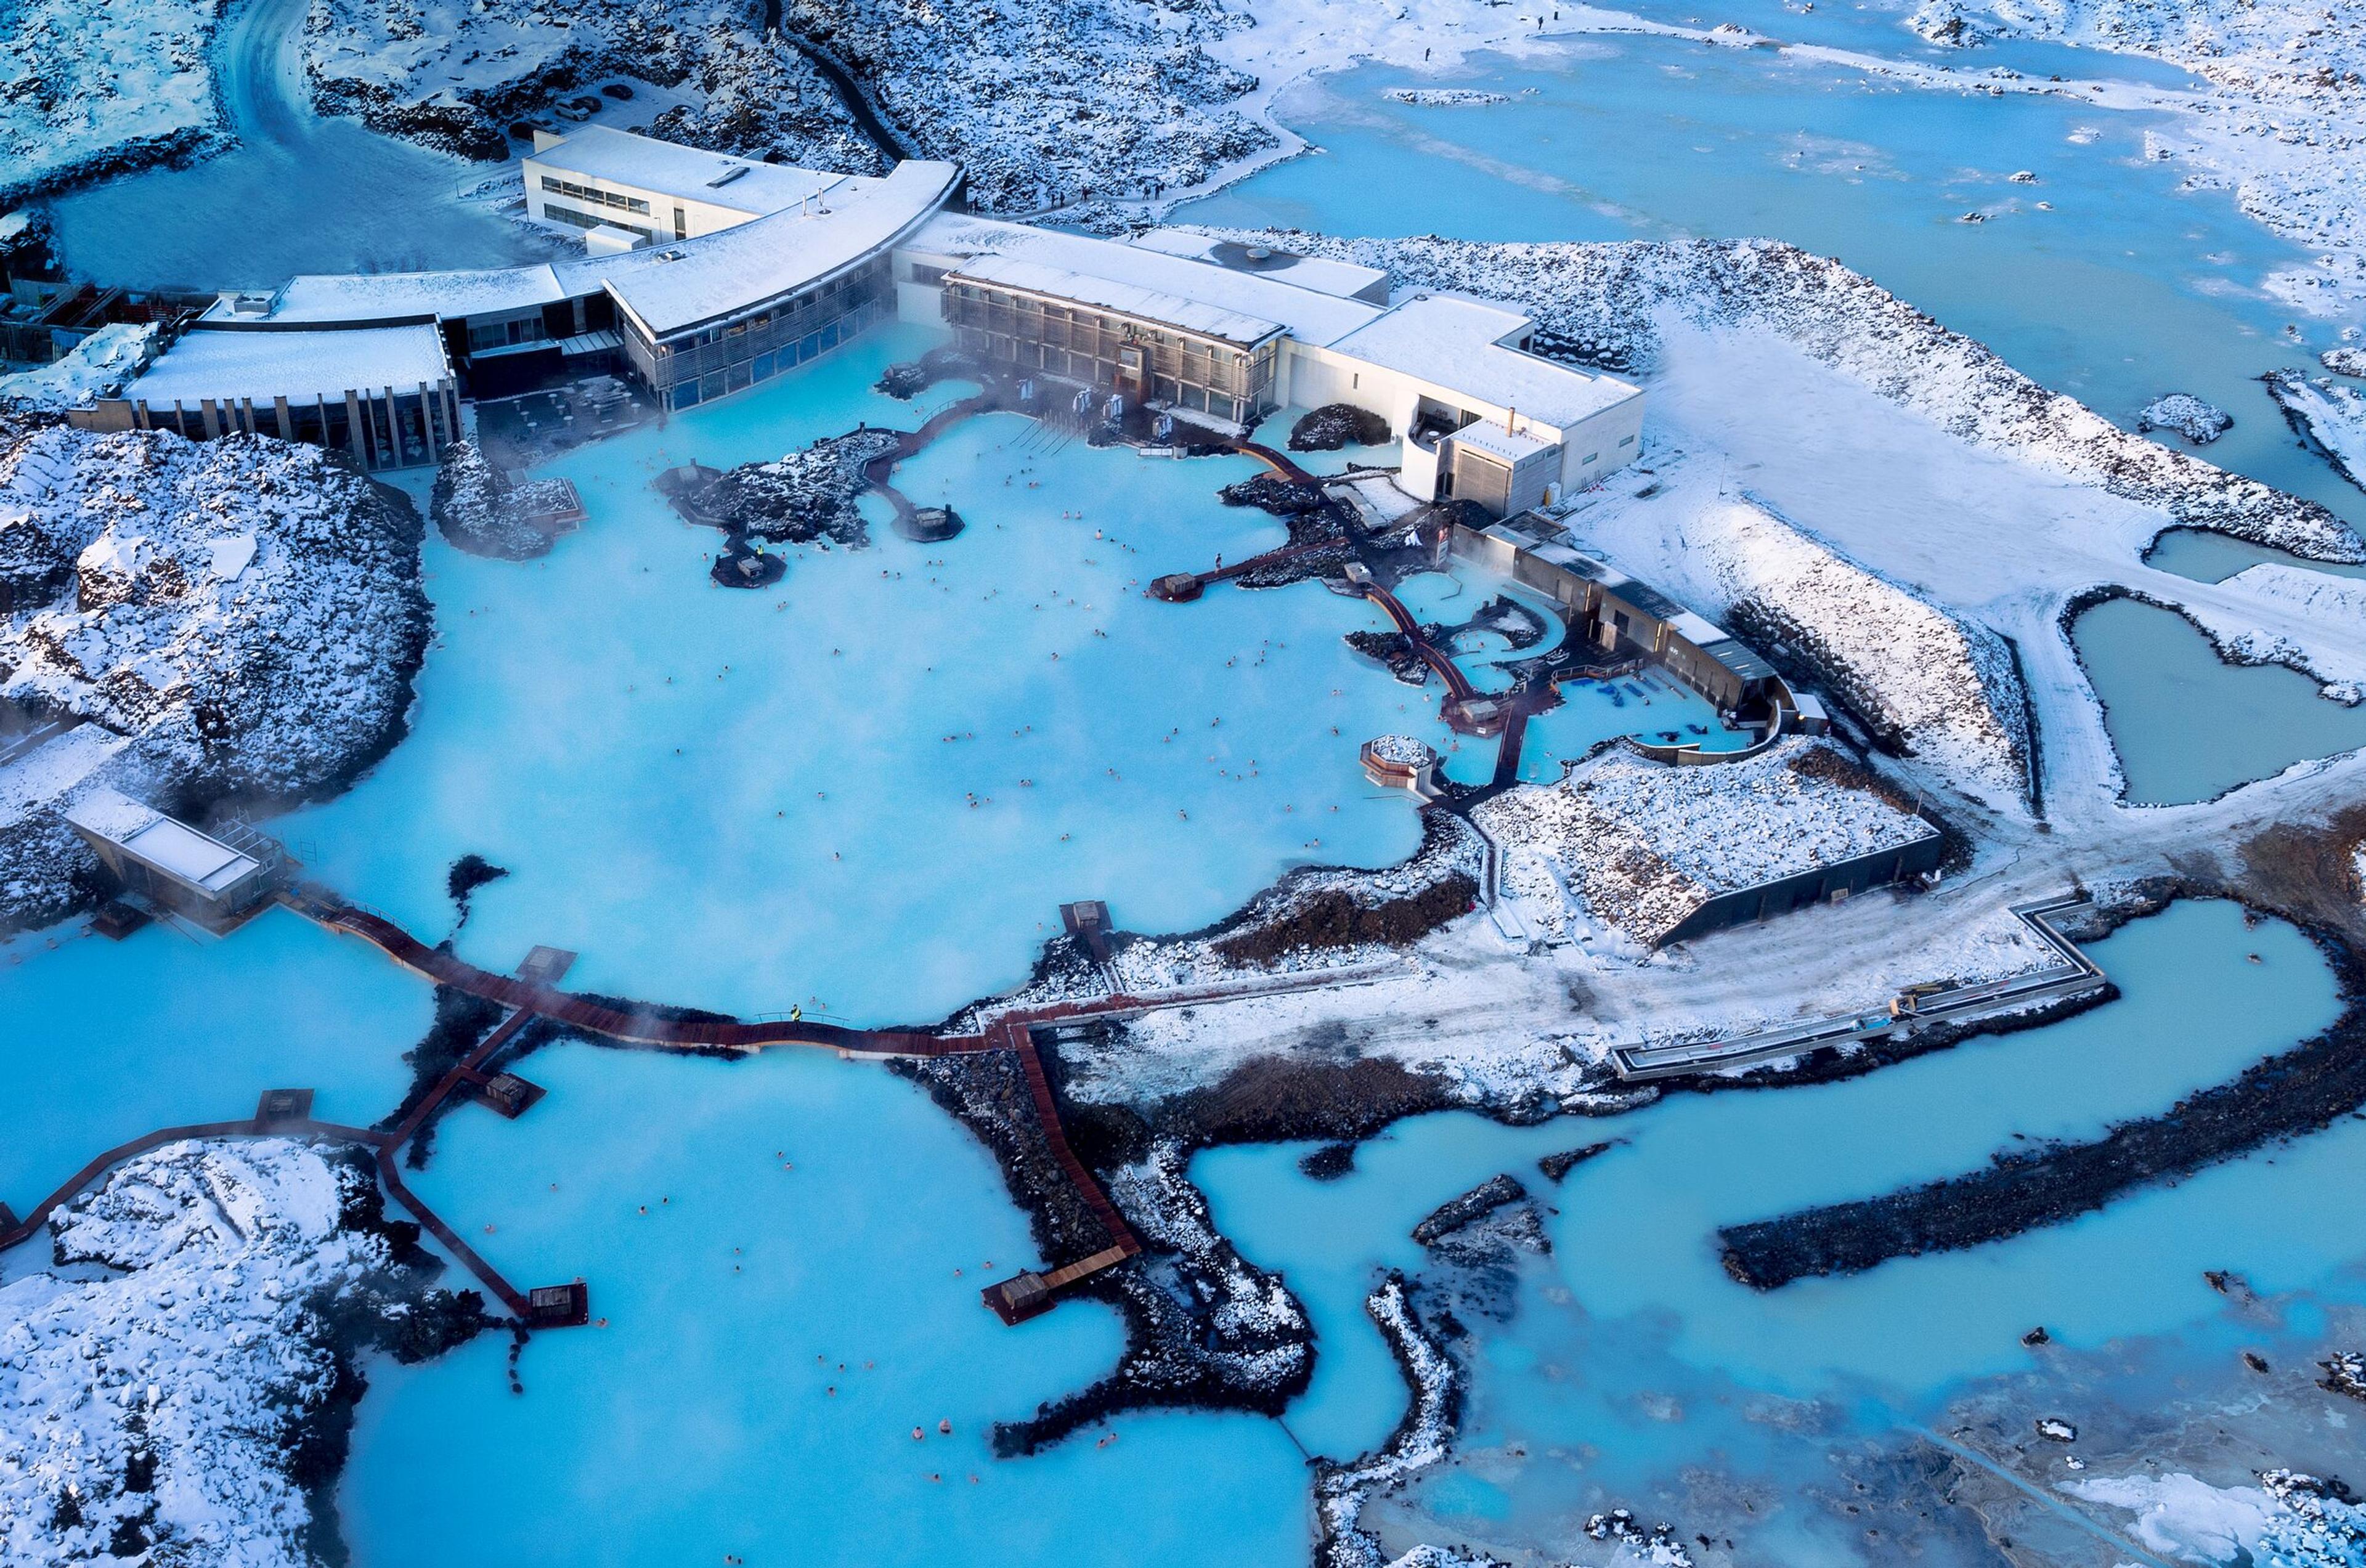 An aerial photo of the Blue Lagoon on a snowy but sunny day.